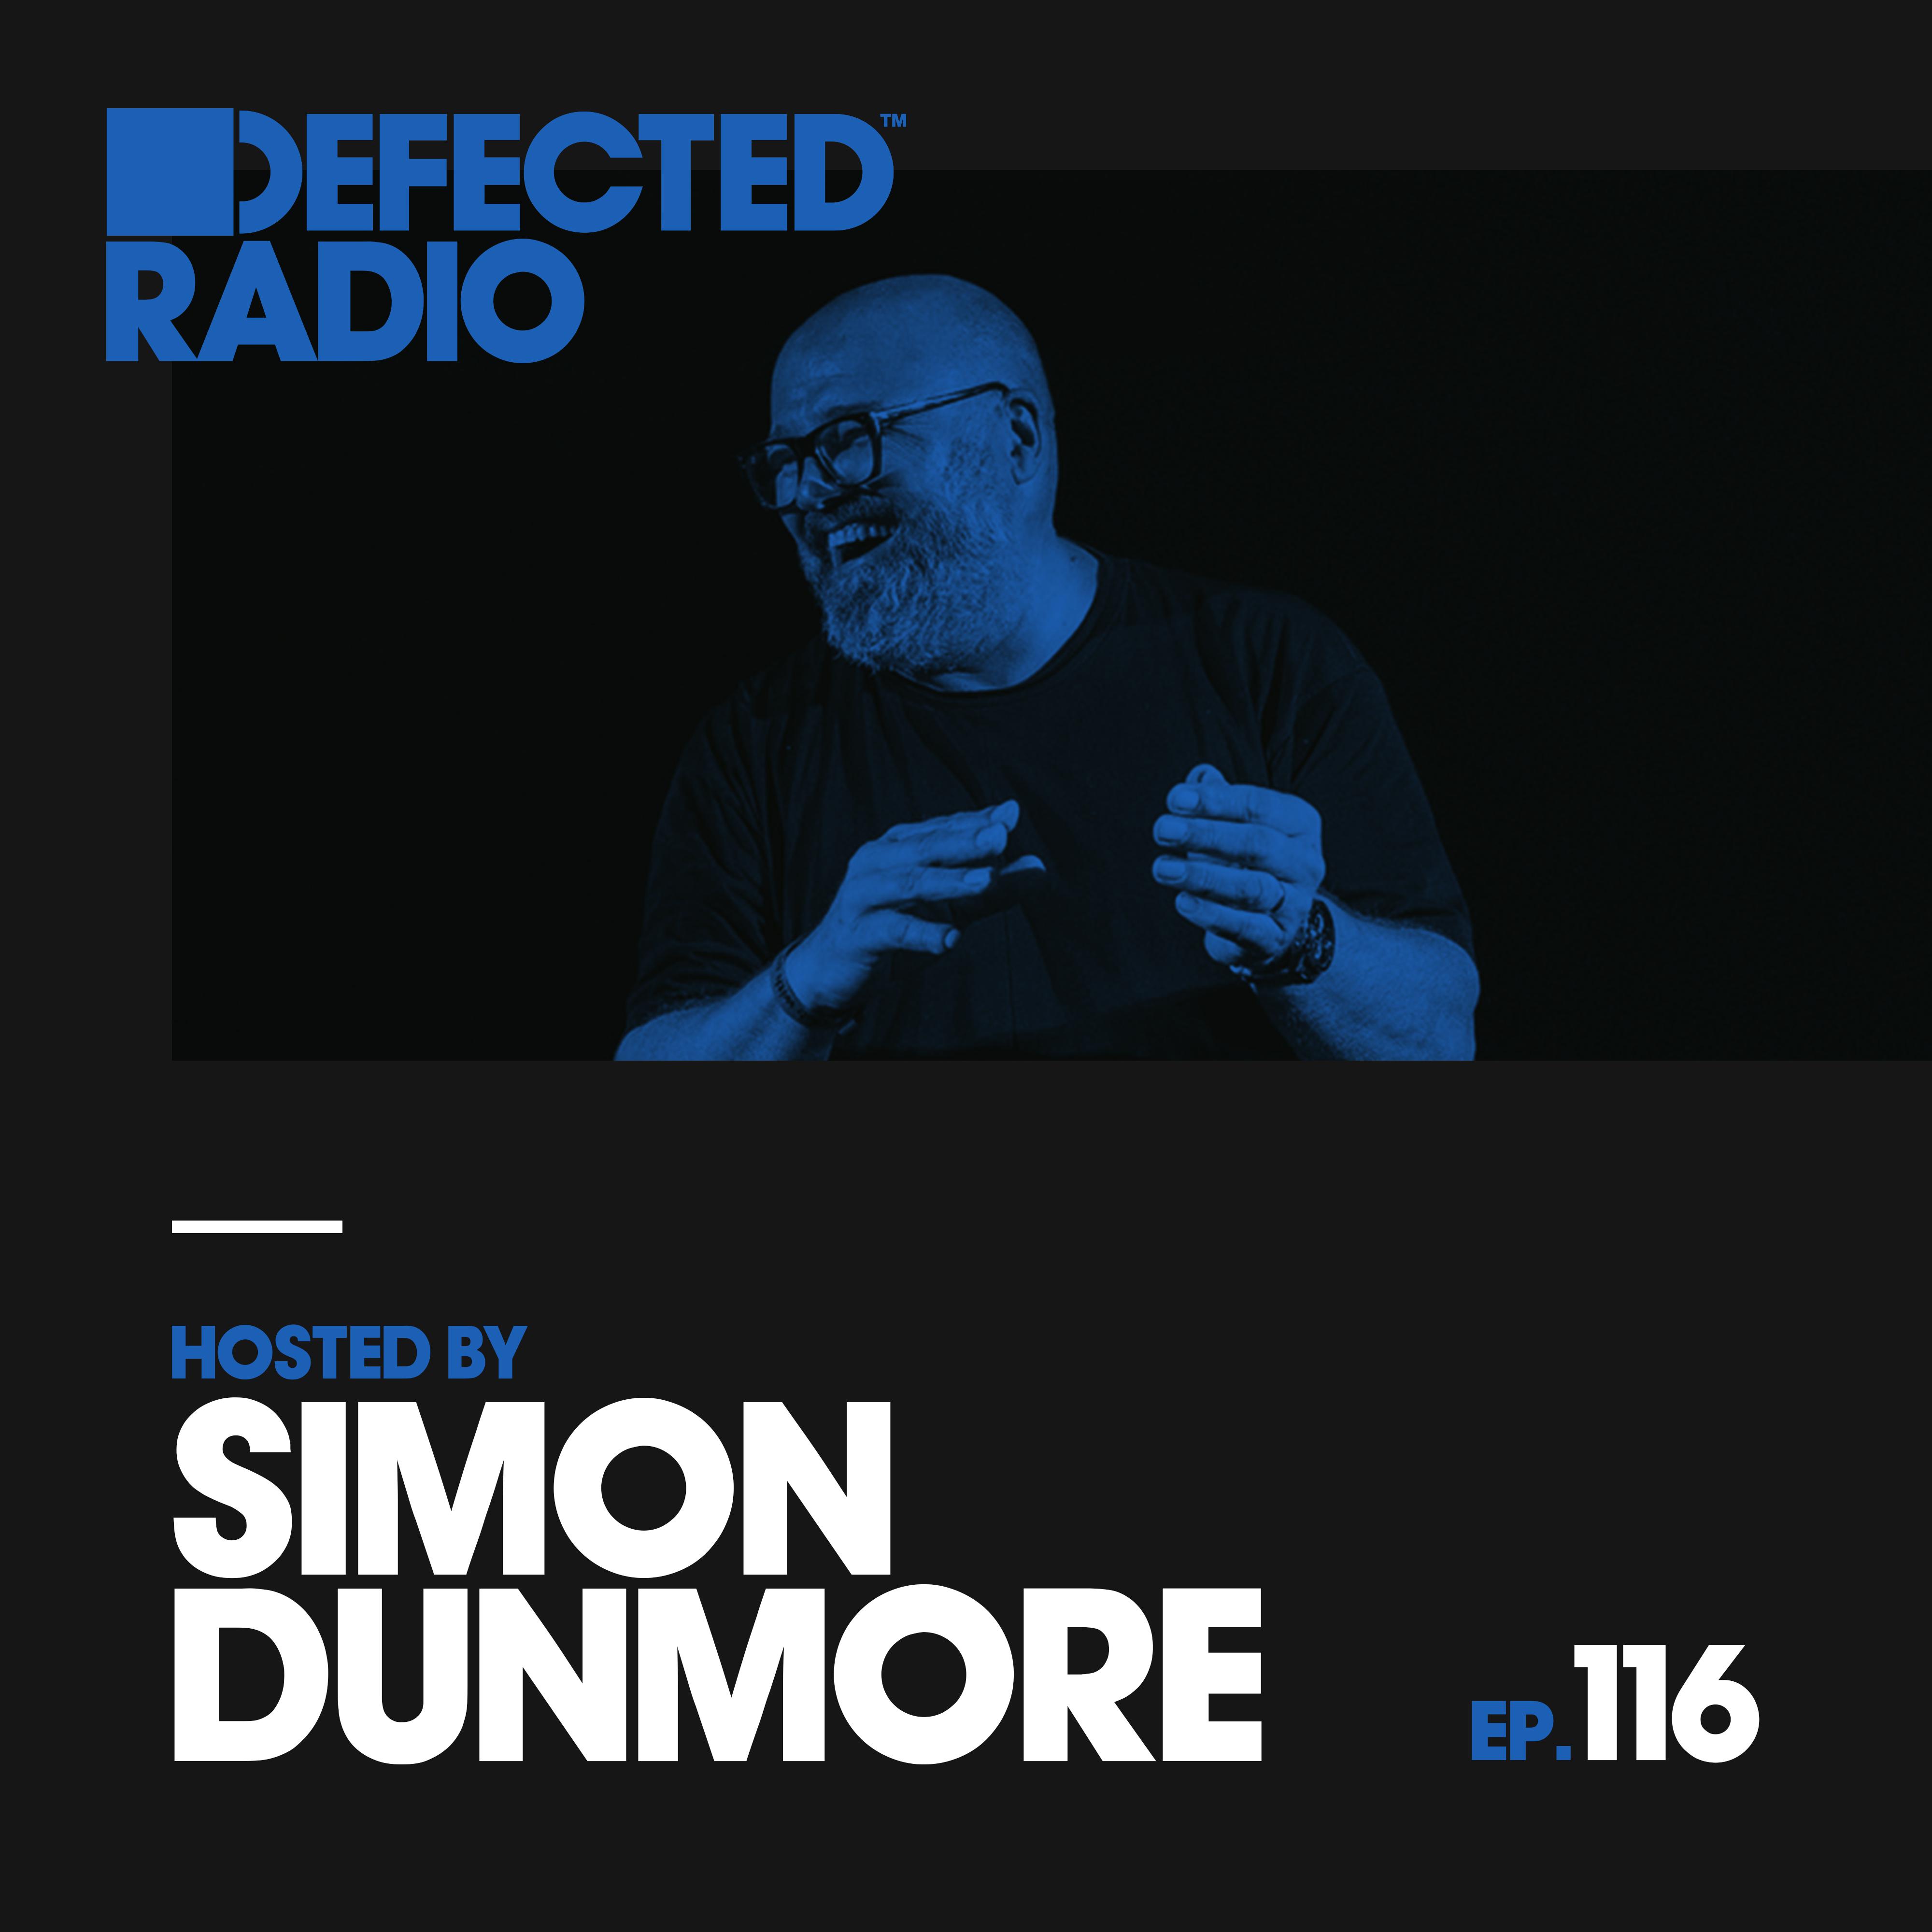 Defected Radio Episode 116 (hosted by Simon Dunmore)